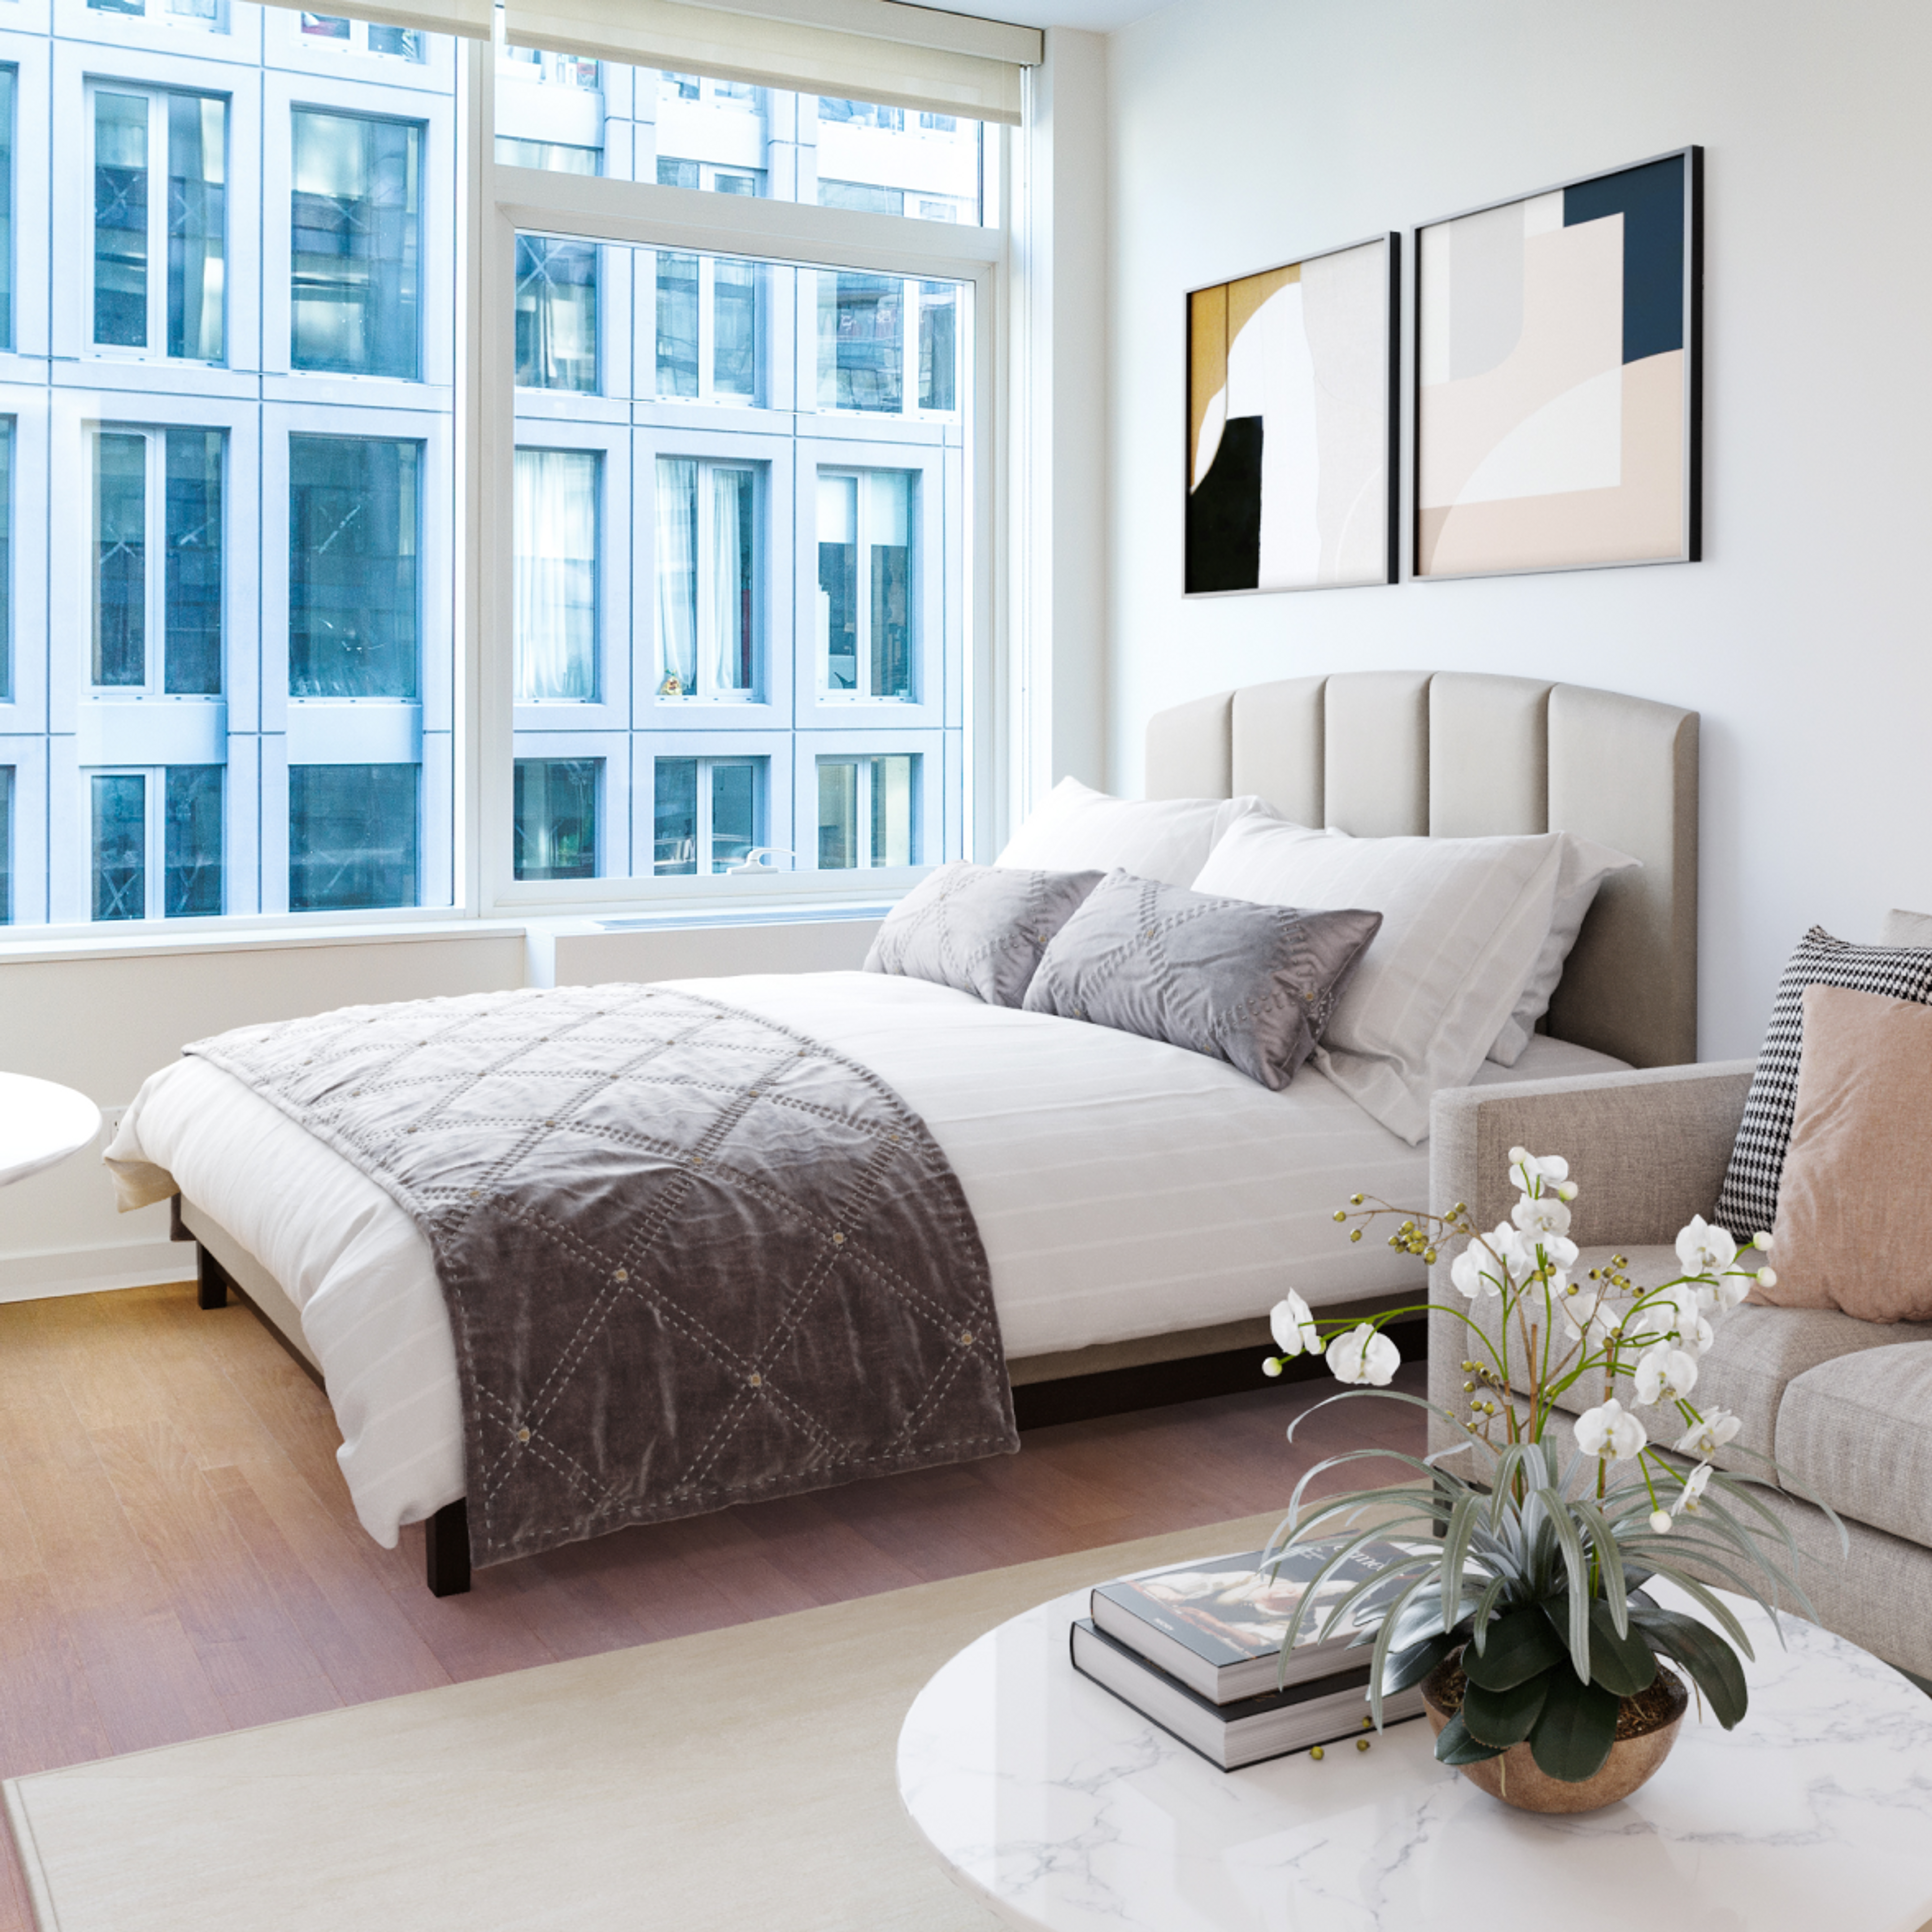 Queen bed with large windows and view of city